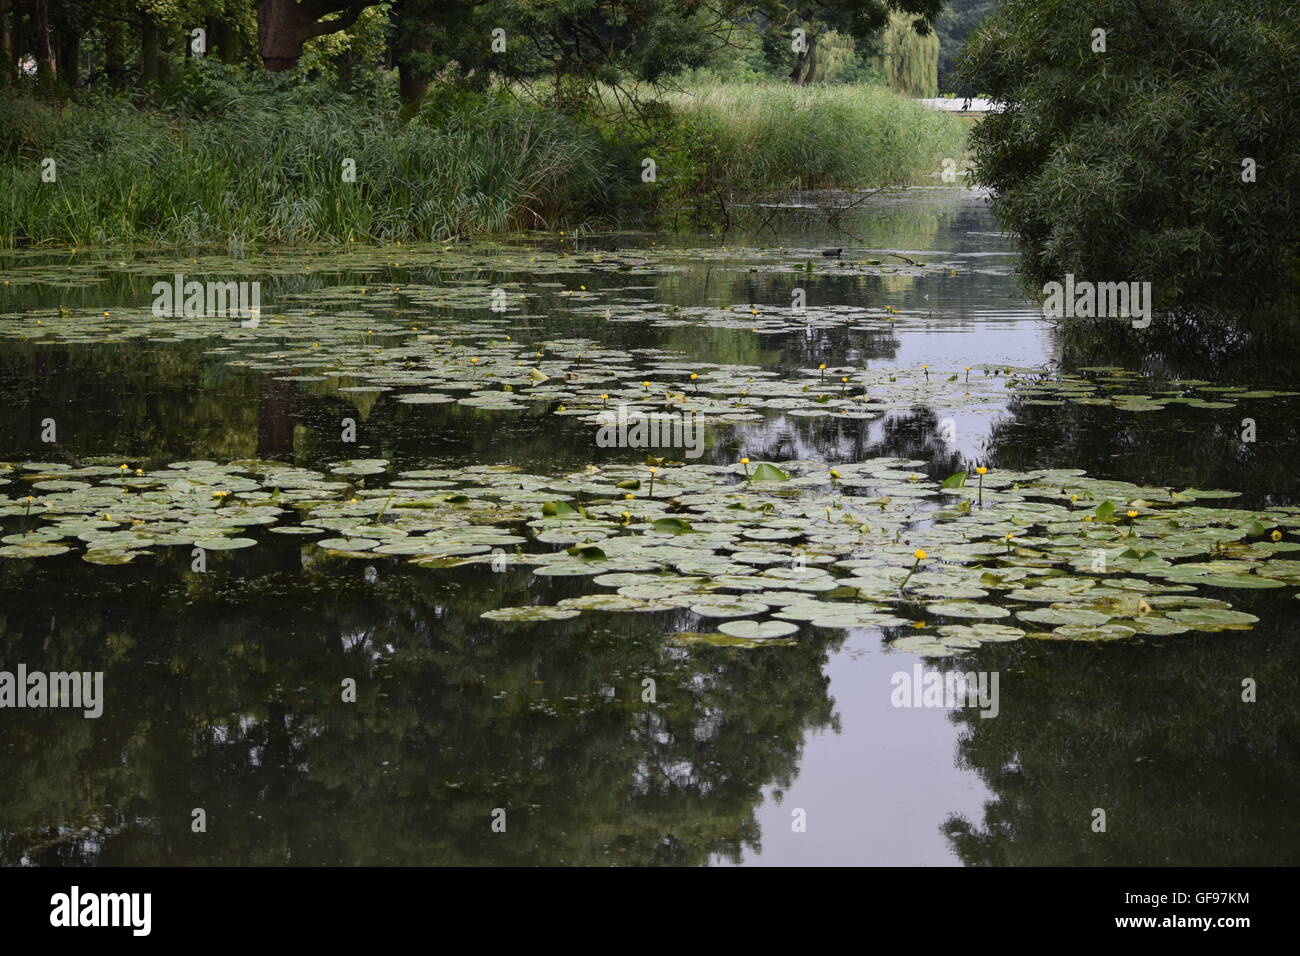 view of lily pads in the pond Stock Photo